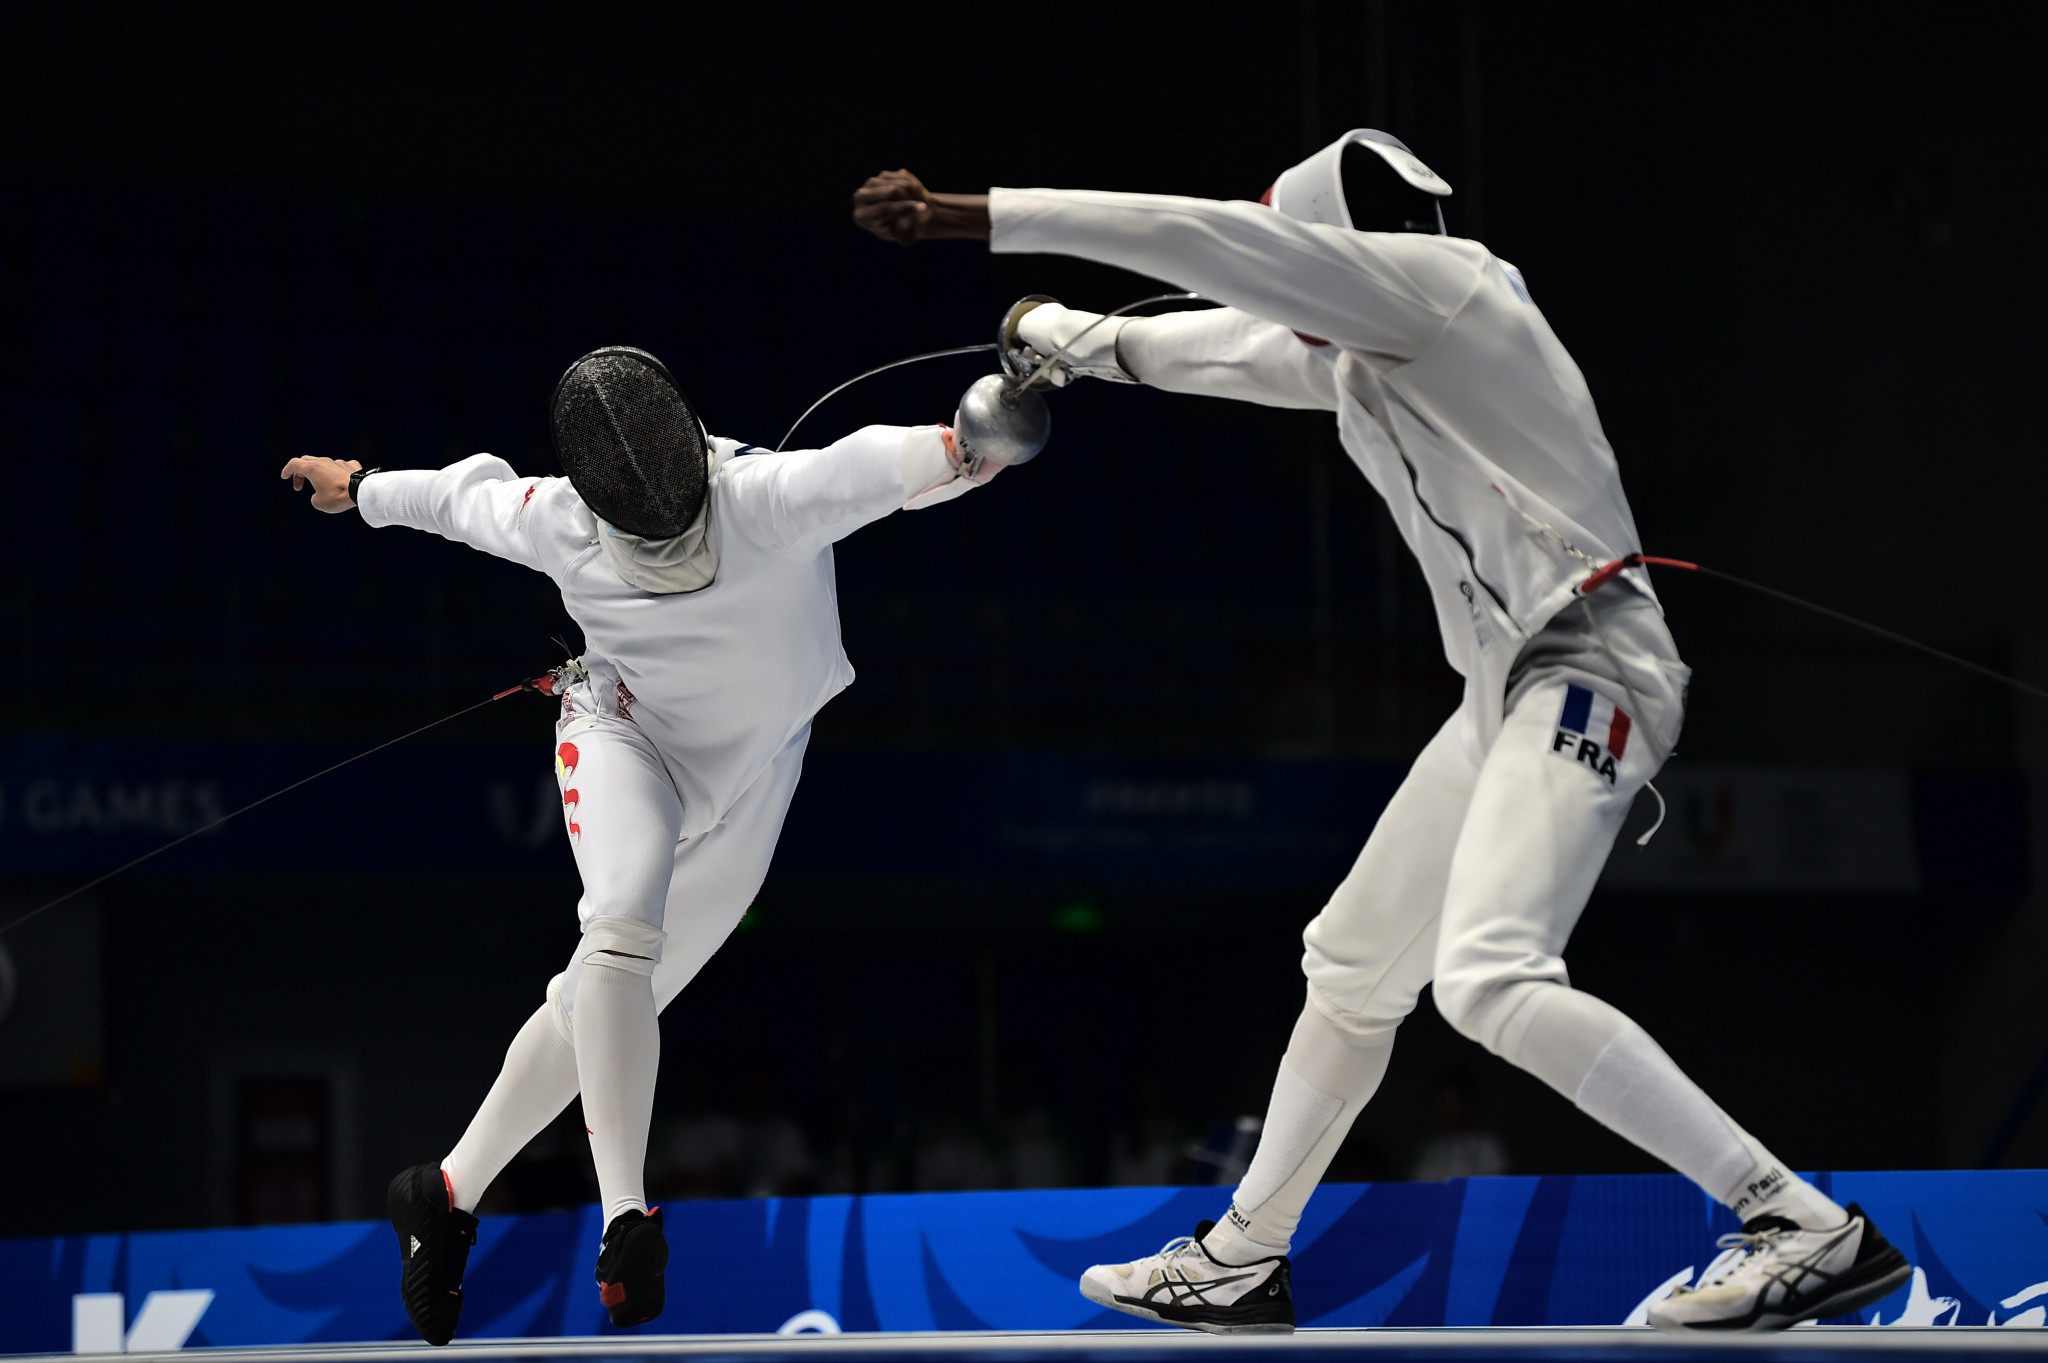 Lan Minghao, left, of China and Kendrick Jean-Joseph of France fight during the men’s fencing epee team gold medal match ©FISU 